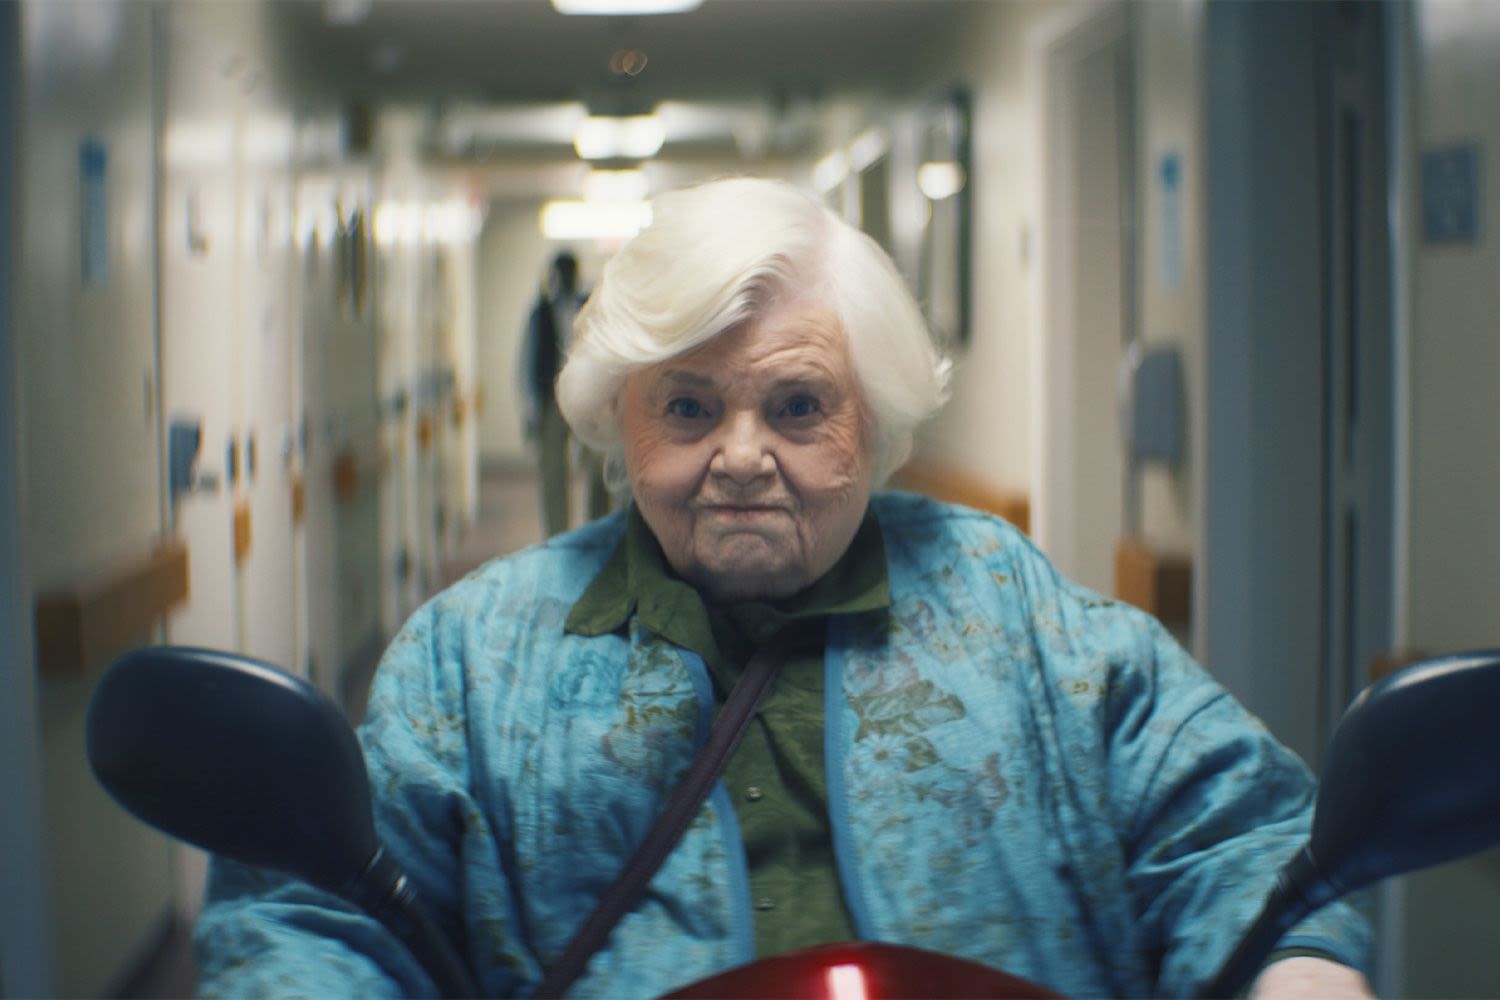 June Squibb, 94, Becomes an 'Unlikely Action Hero' in Hilarious 'Thelma' Trailer (Exclusive)